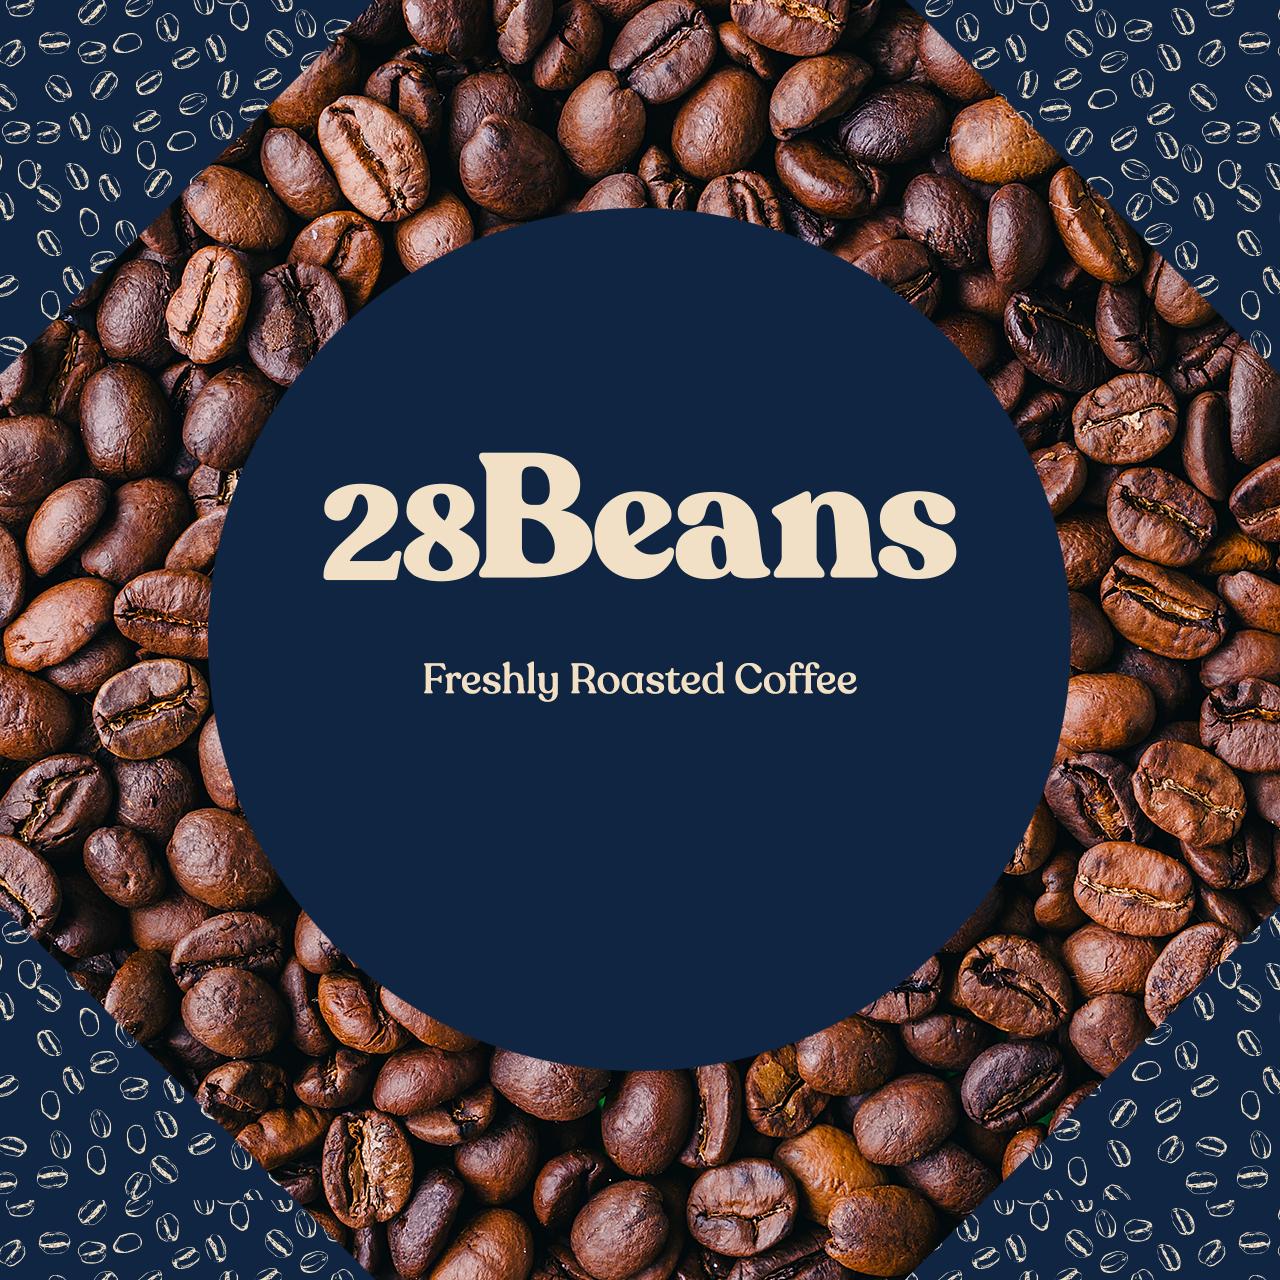 28Beans - Freshly Roasted Coffee - Feature Article